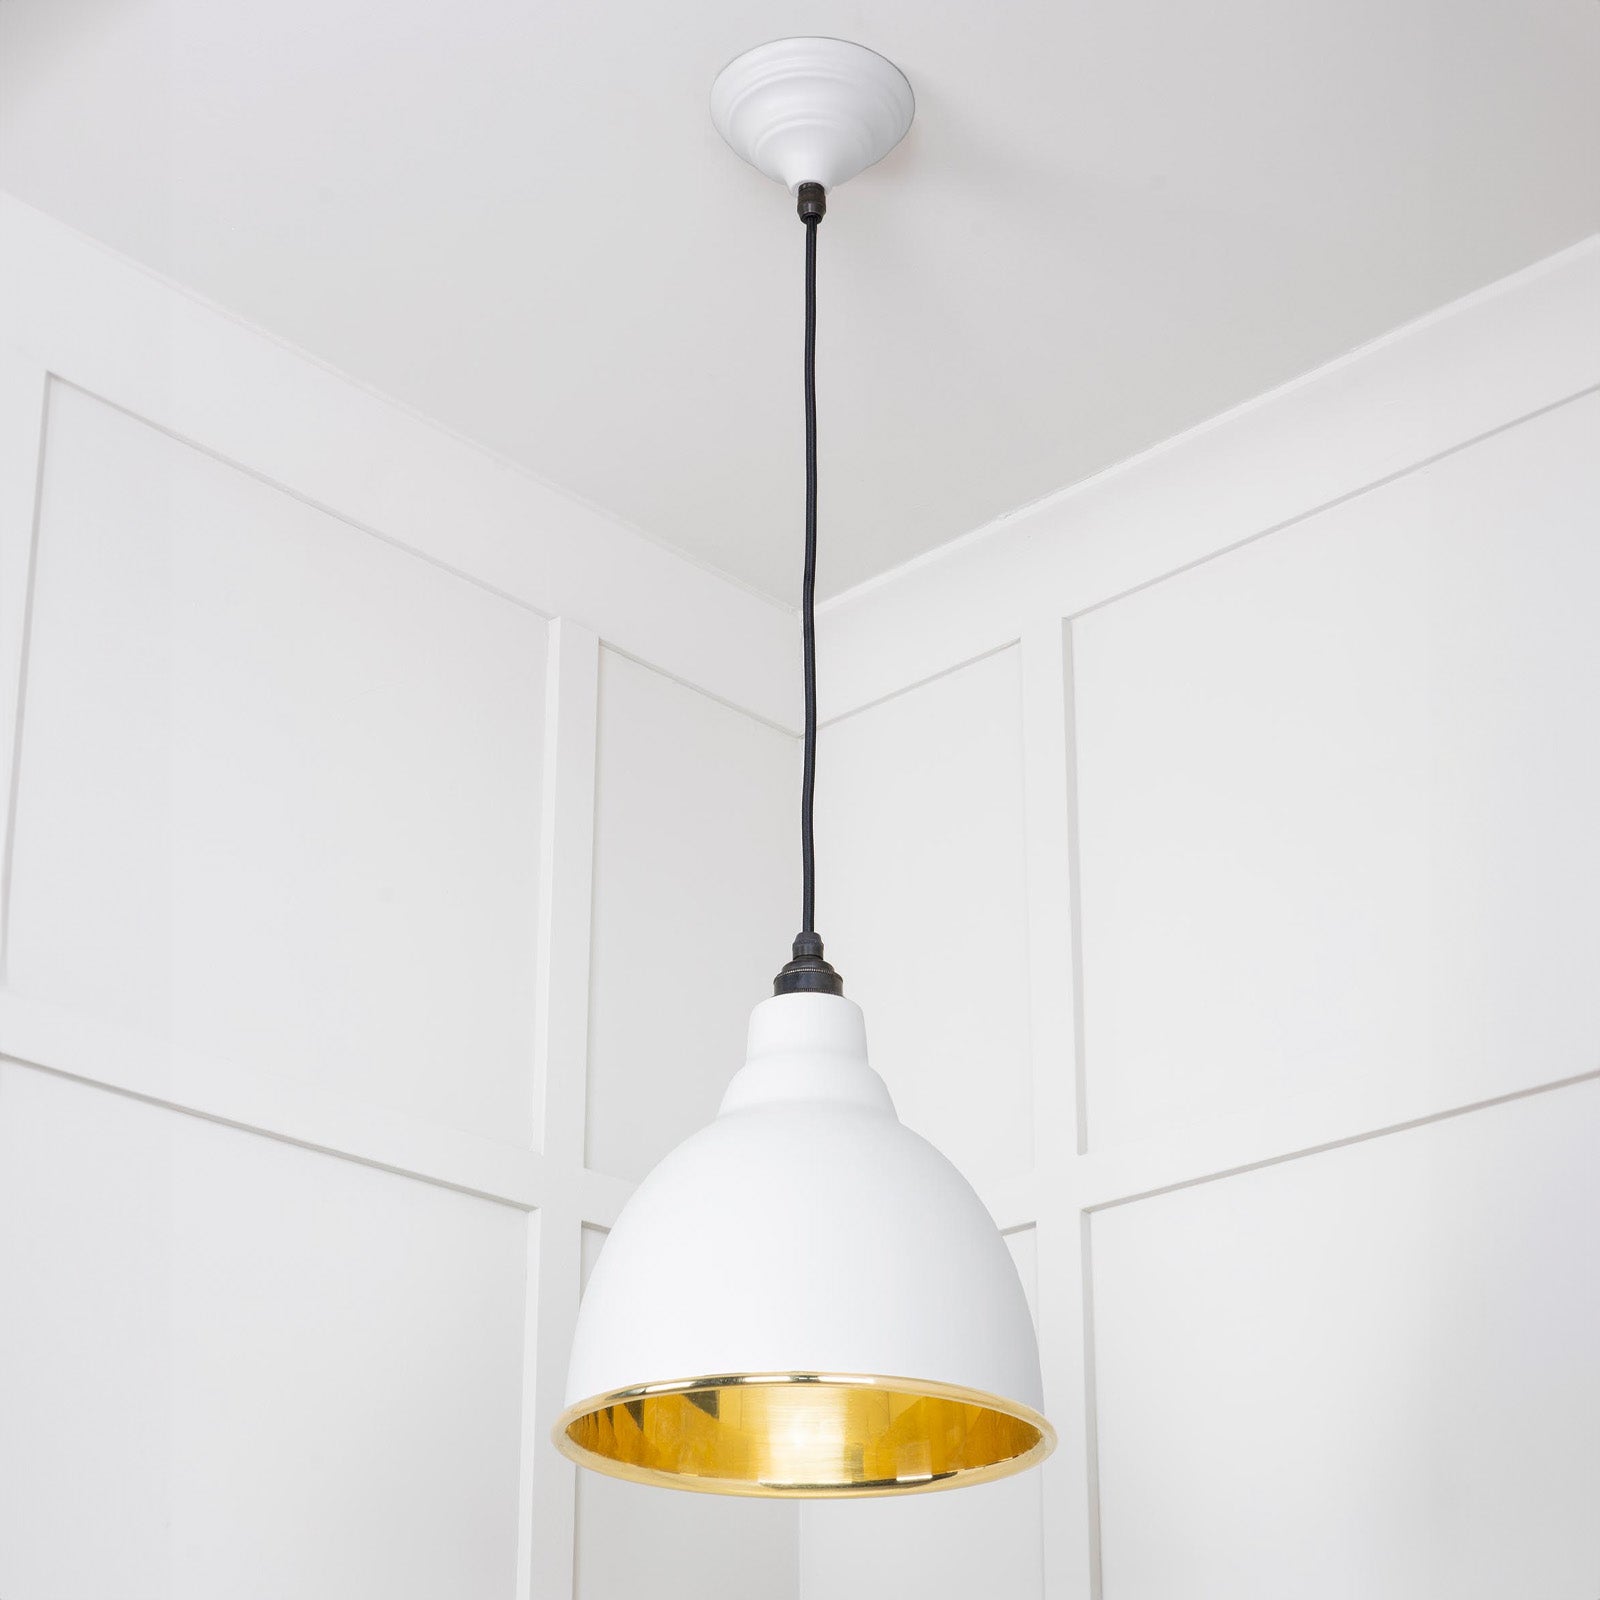 SHOW Full Image of Hanging Brindley Ceiling Light in Flock